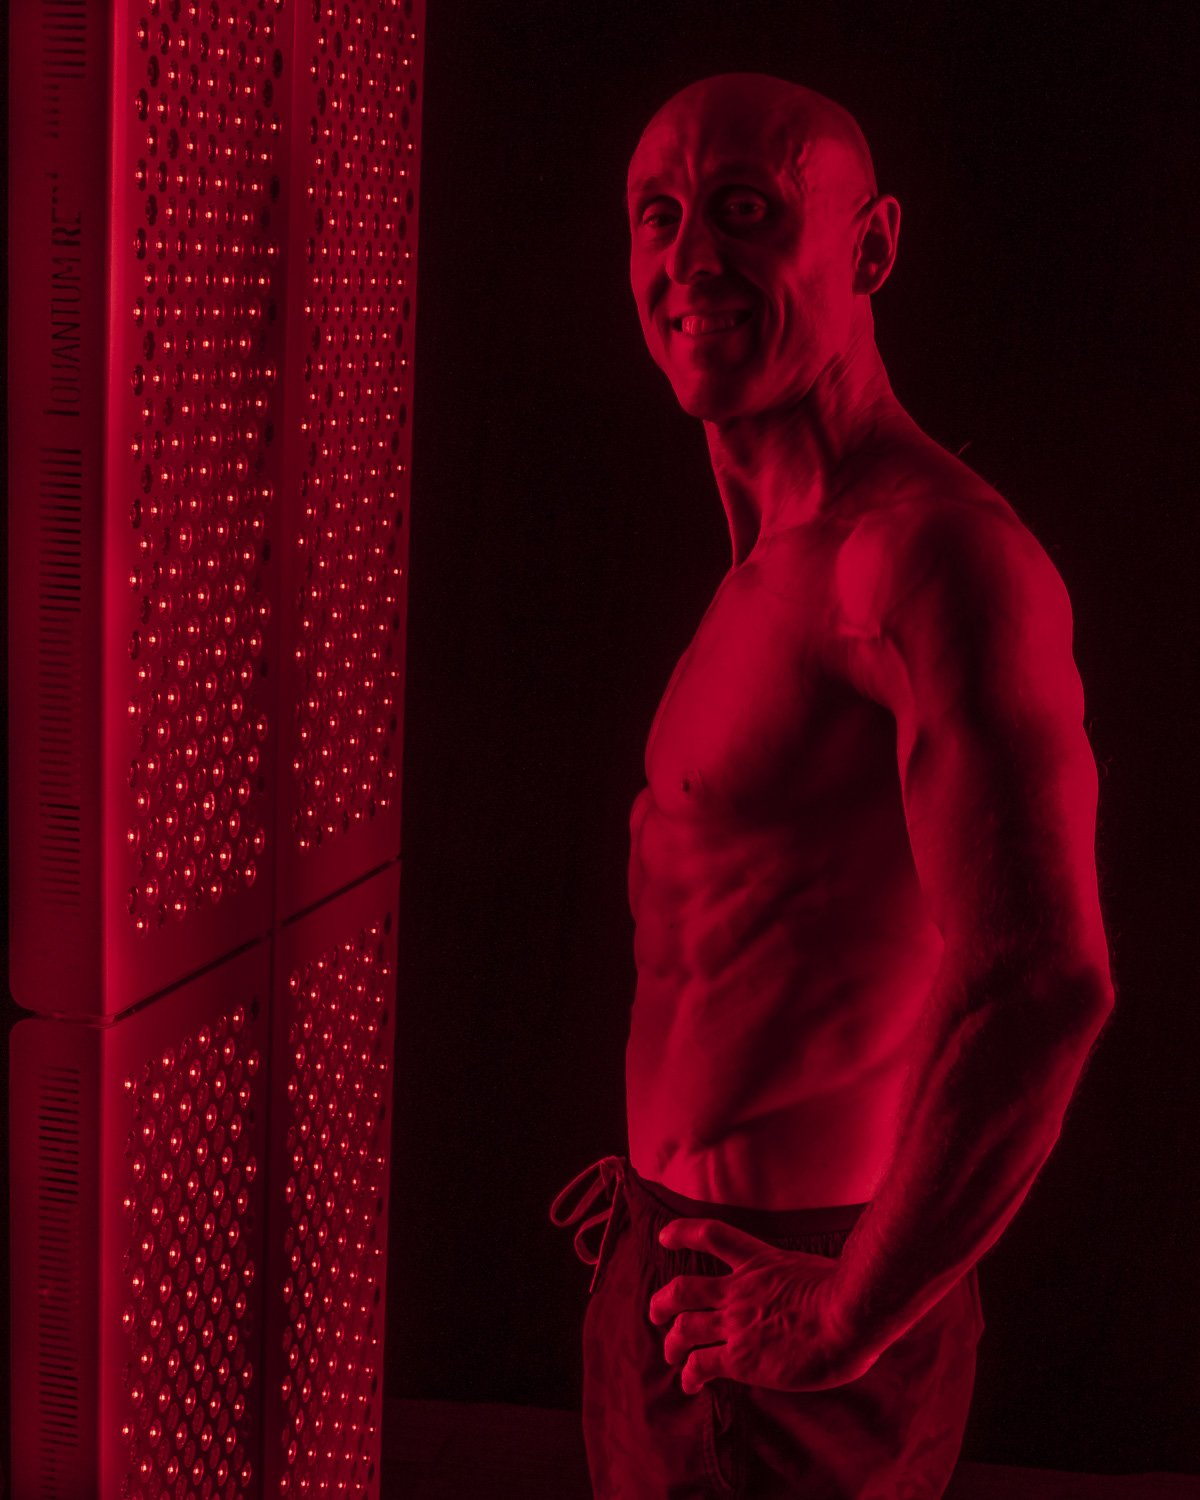 quantum red | red light therapy scottsdale | quantrum red owner jake weeks standing in front of red light panels.jpg